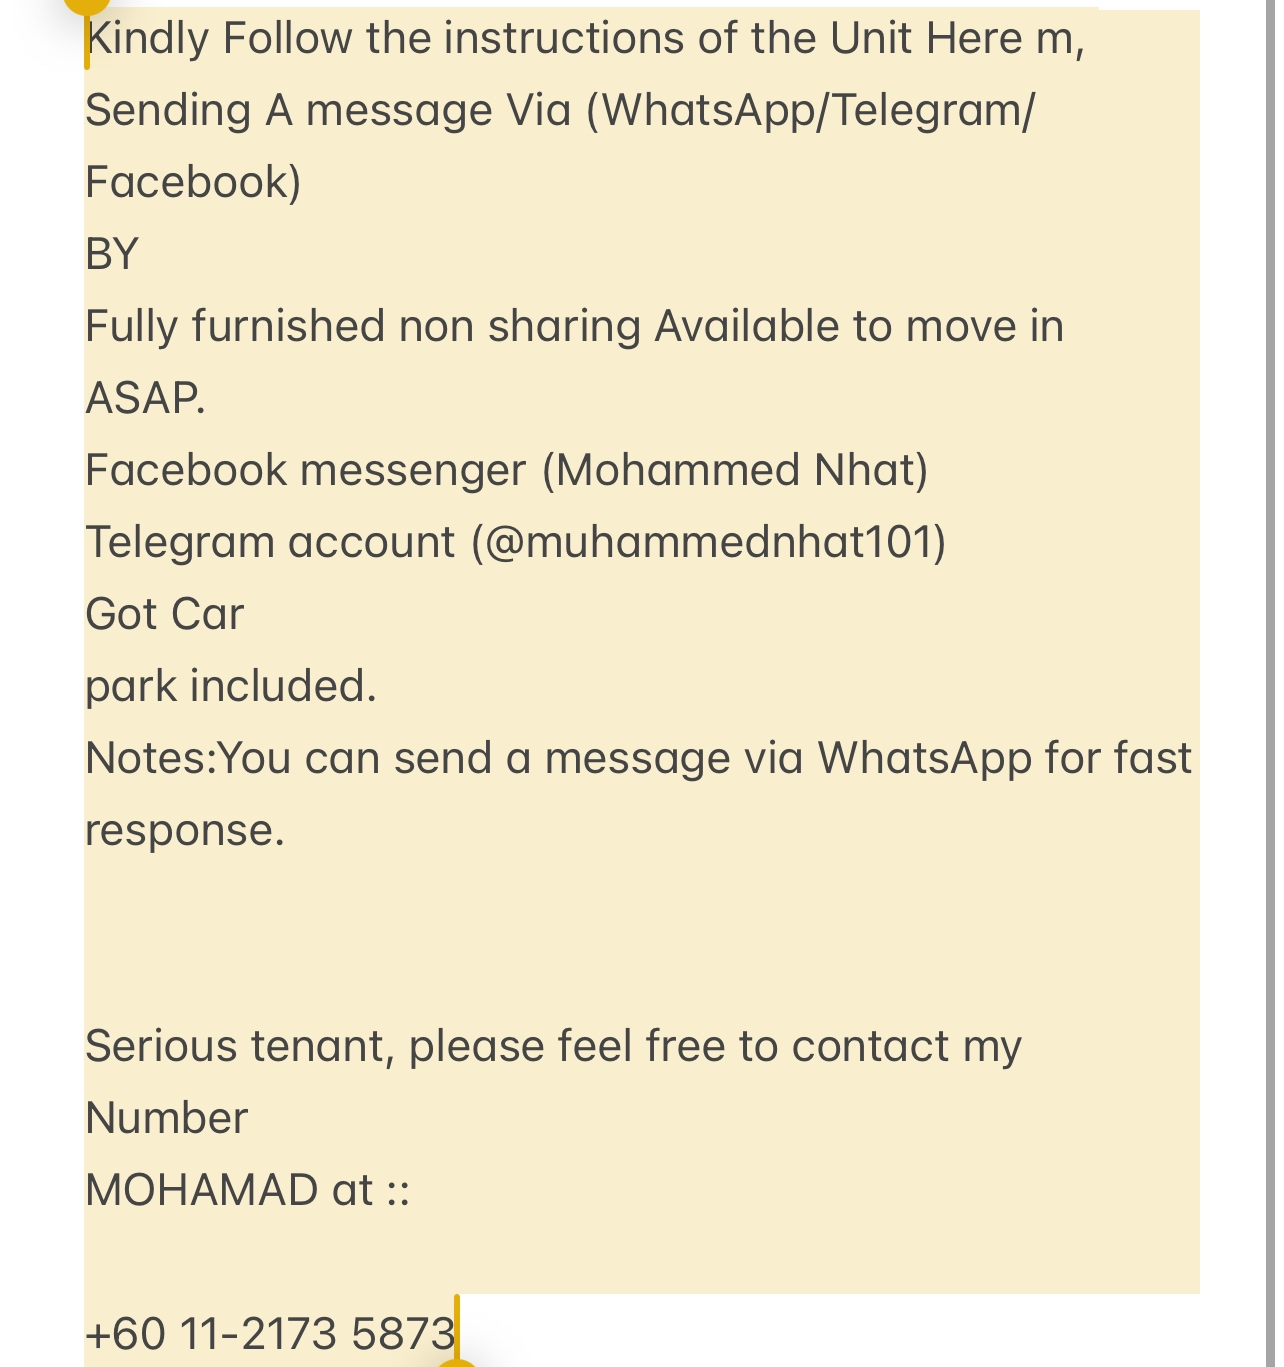 room for rent, master room, jalan chaah utama, Send the owner a message on WhatsApp/facebook if you want to RENT the unit facebook (Mohammed Nhat)&Telegram(@muhammednhat101) Fully furnished non sharing :(comfortable)